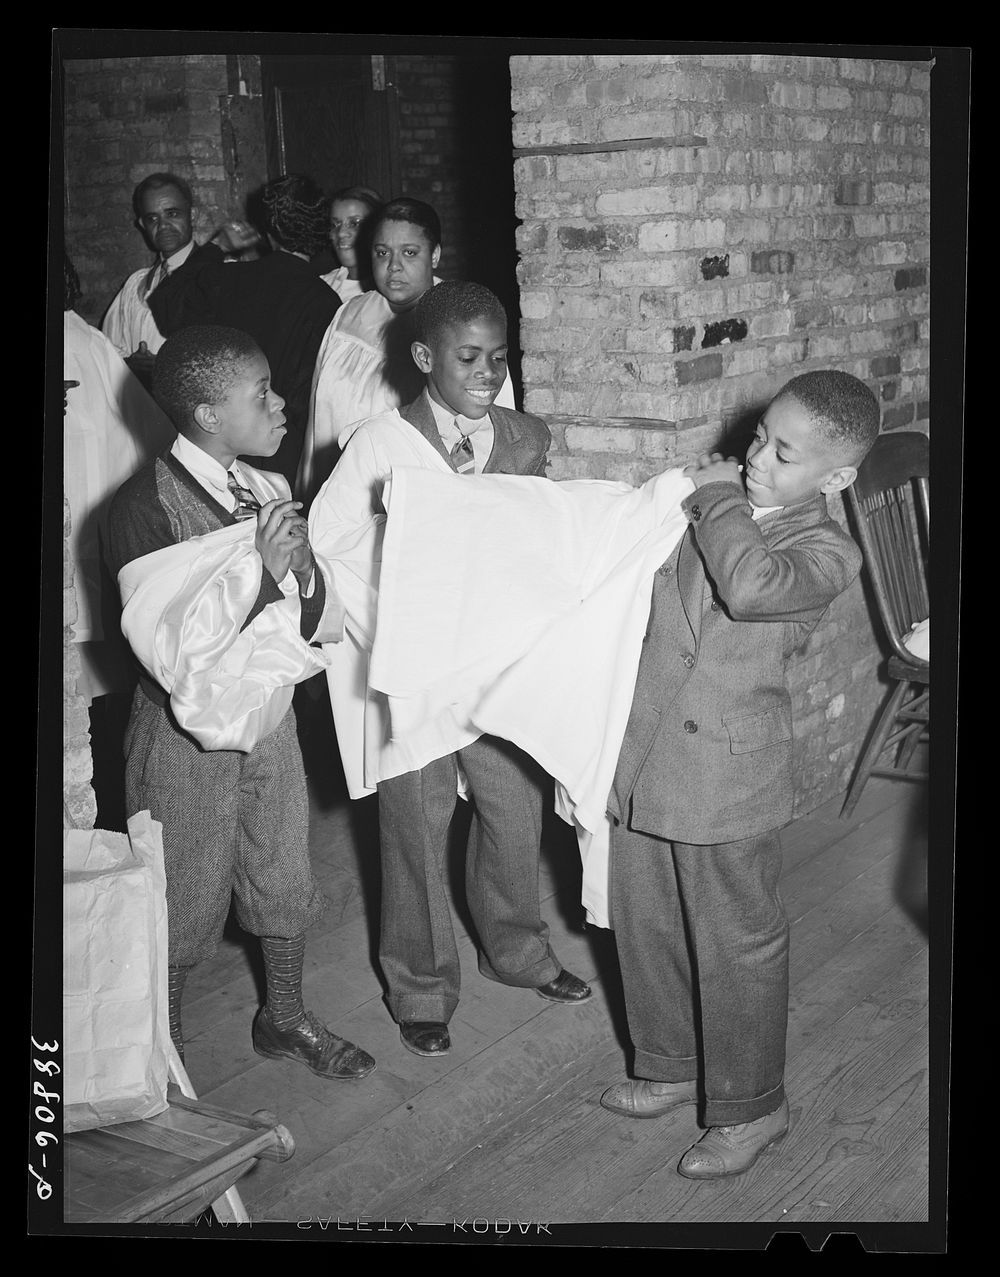 Boys of children's choir putting on their robes. Chicago, Illinois by Russell Lee